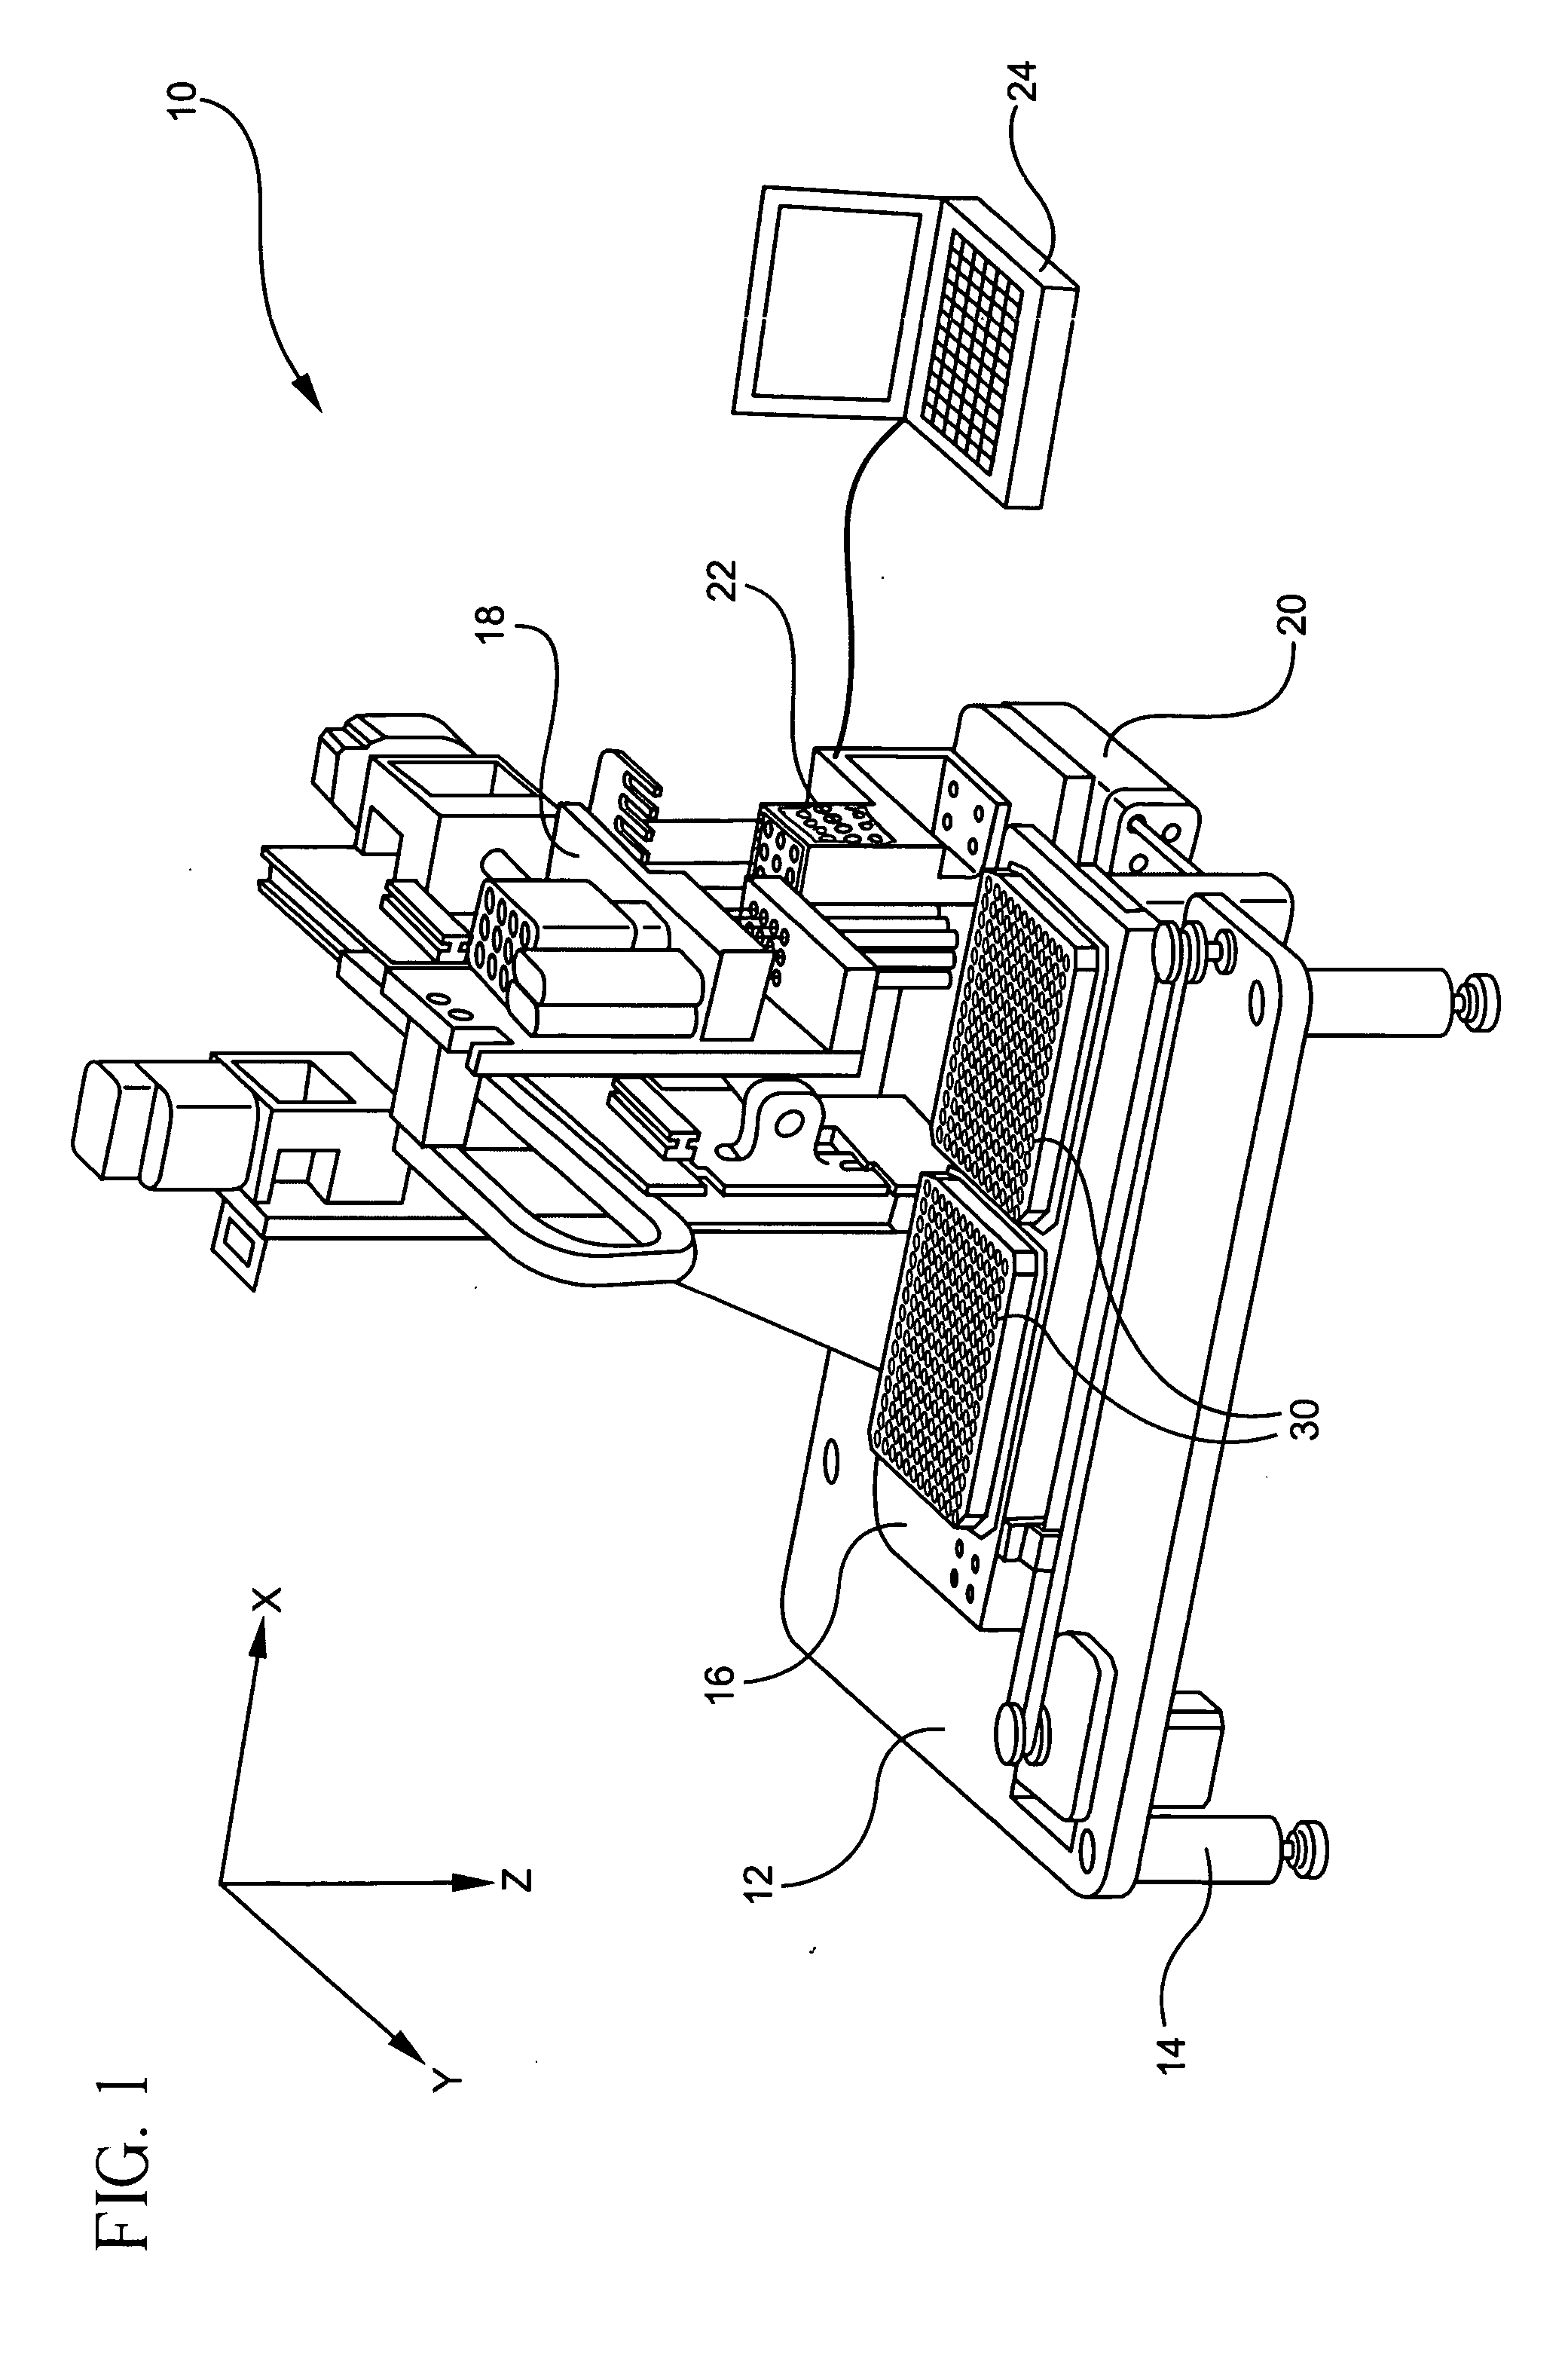 Apparatus and method for transferring samples from a source to a target